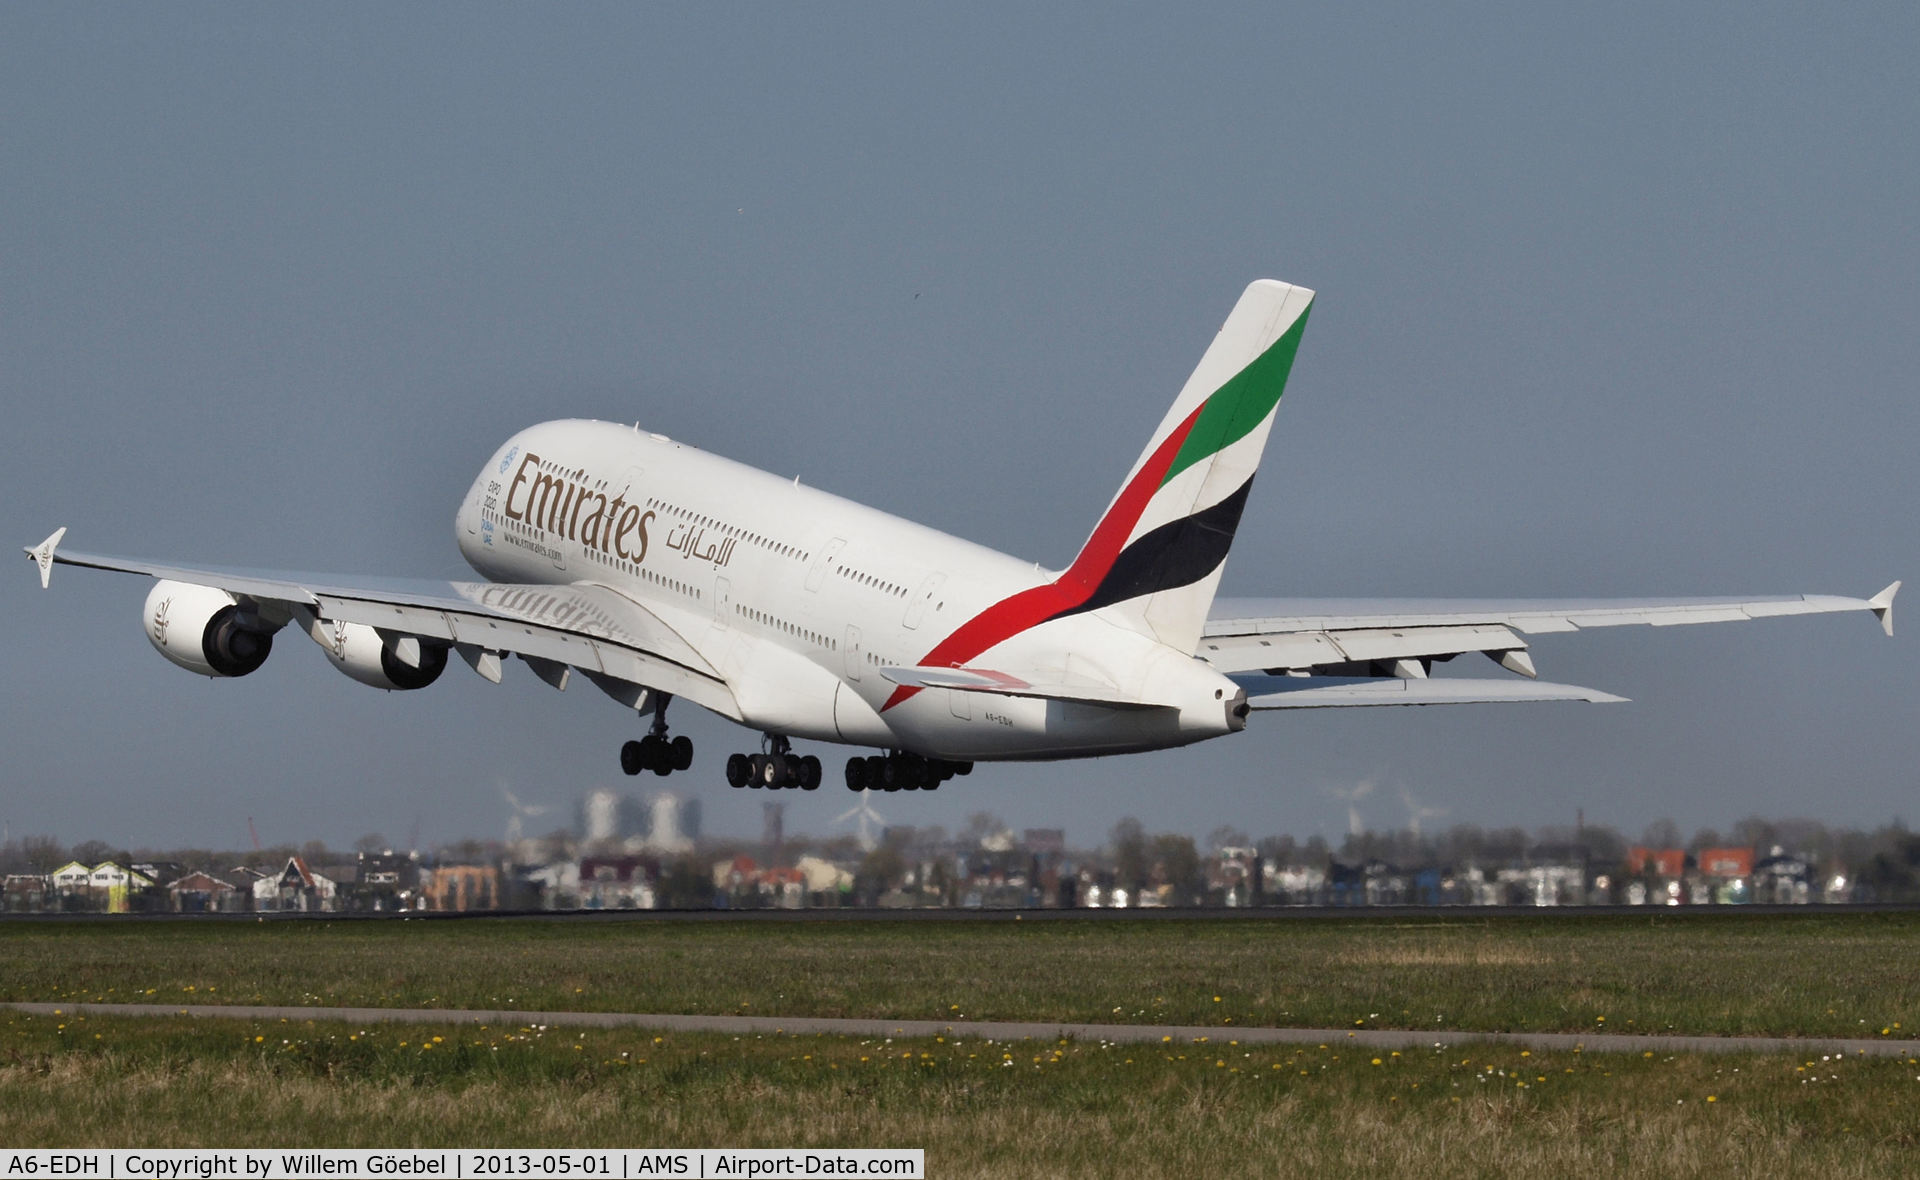 A6-EDH, 2009 Airbus A380-861 C/N 025, Take off from runway 36L of Schiphol Airport